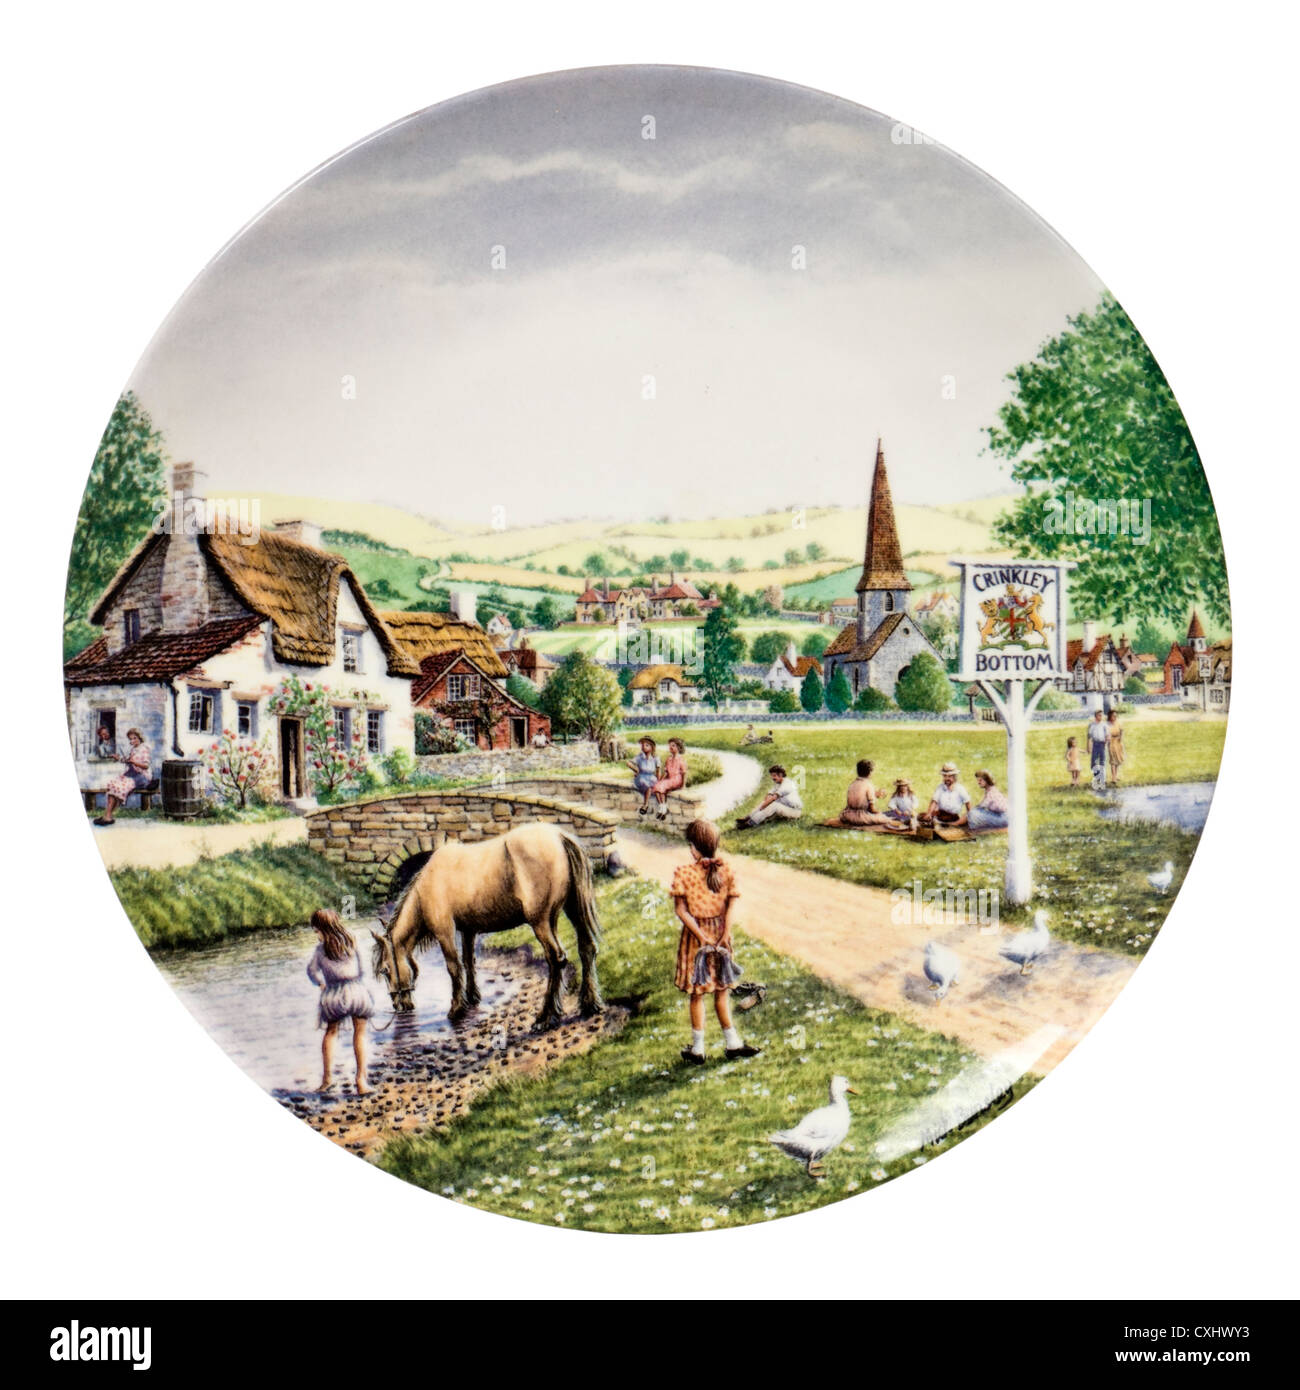 Royal Doulton porcelain collector plate - 'The Village Green', first issue in the 'Crinkley Bottom' Limited Edition series. Stock Photo